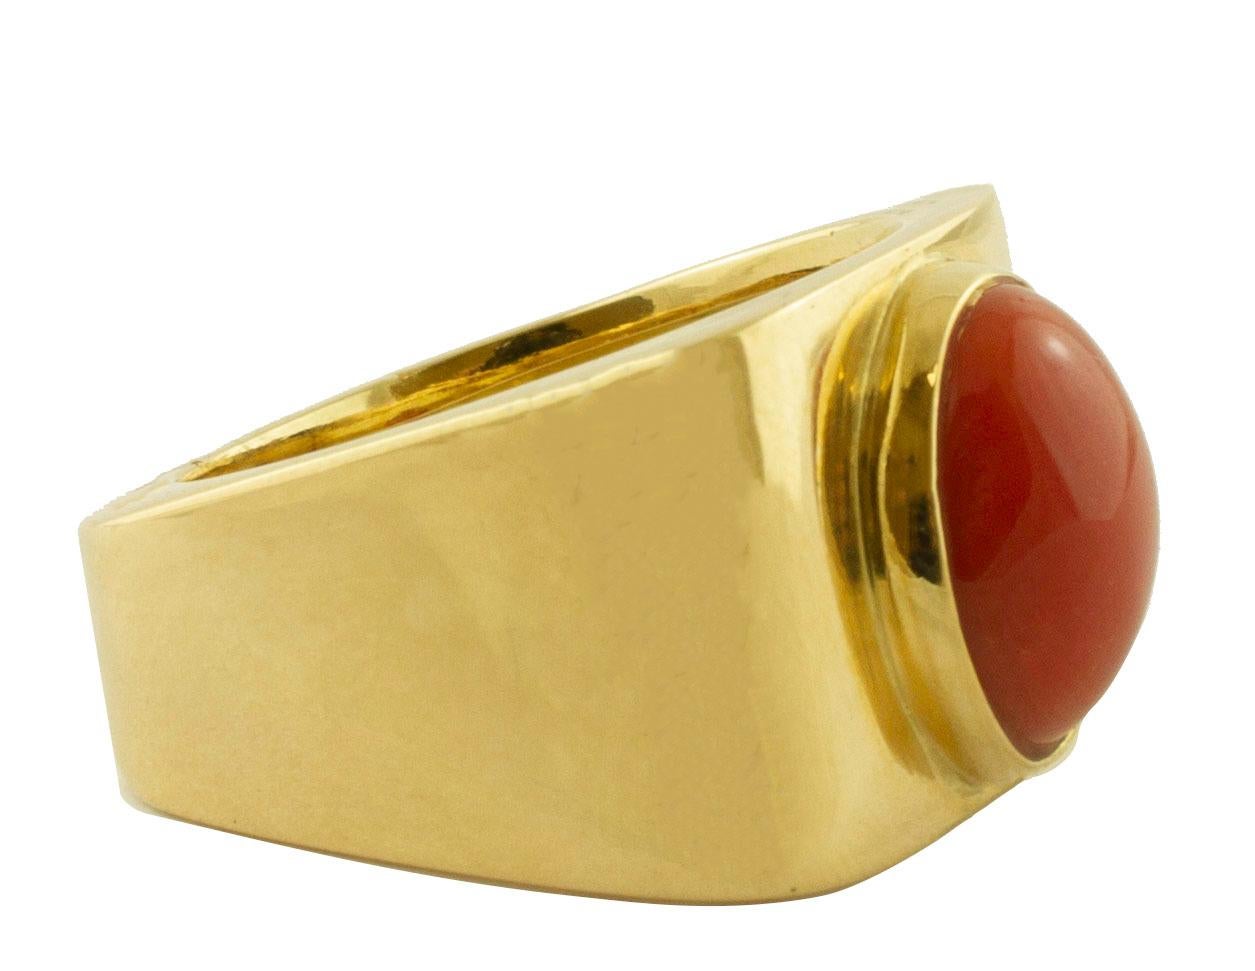 SHIPPING POLICY:
No additional costs will be added to this order.
Shipping costs will be totally covered by the seller (customs duties included). 


Vintage ring in 18k yellow gold squared structure with a central coral.
The origin of this ring